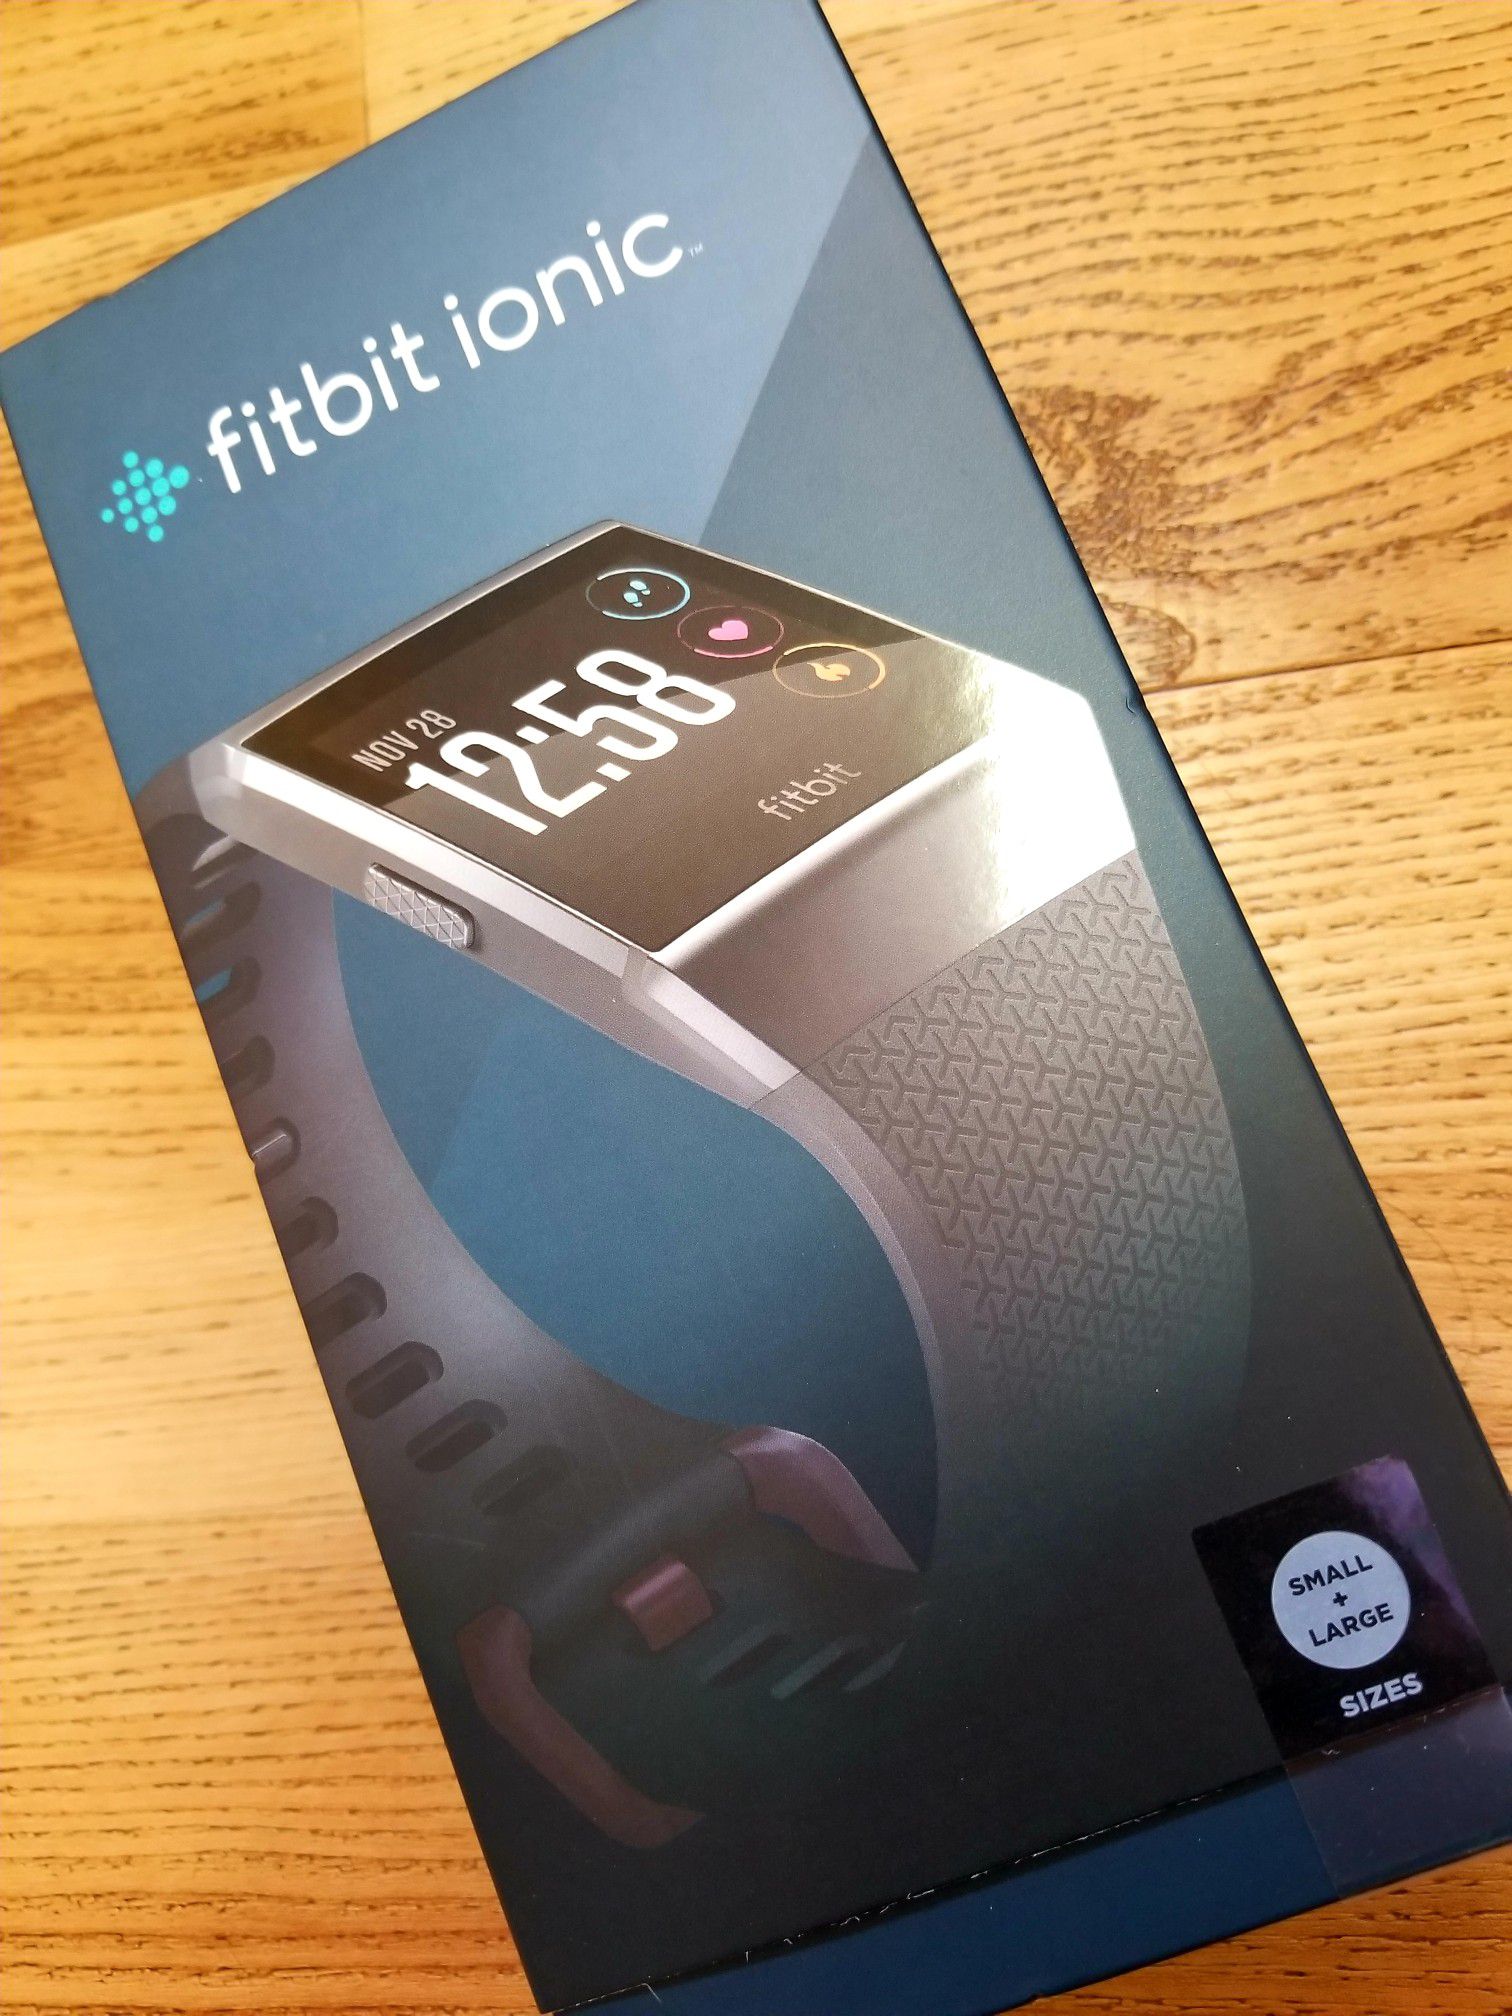 Fitbit Ionic brand new in box